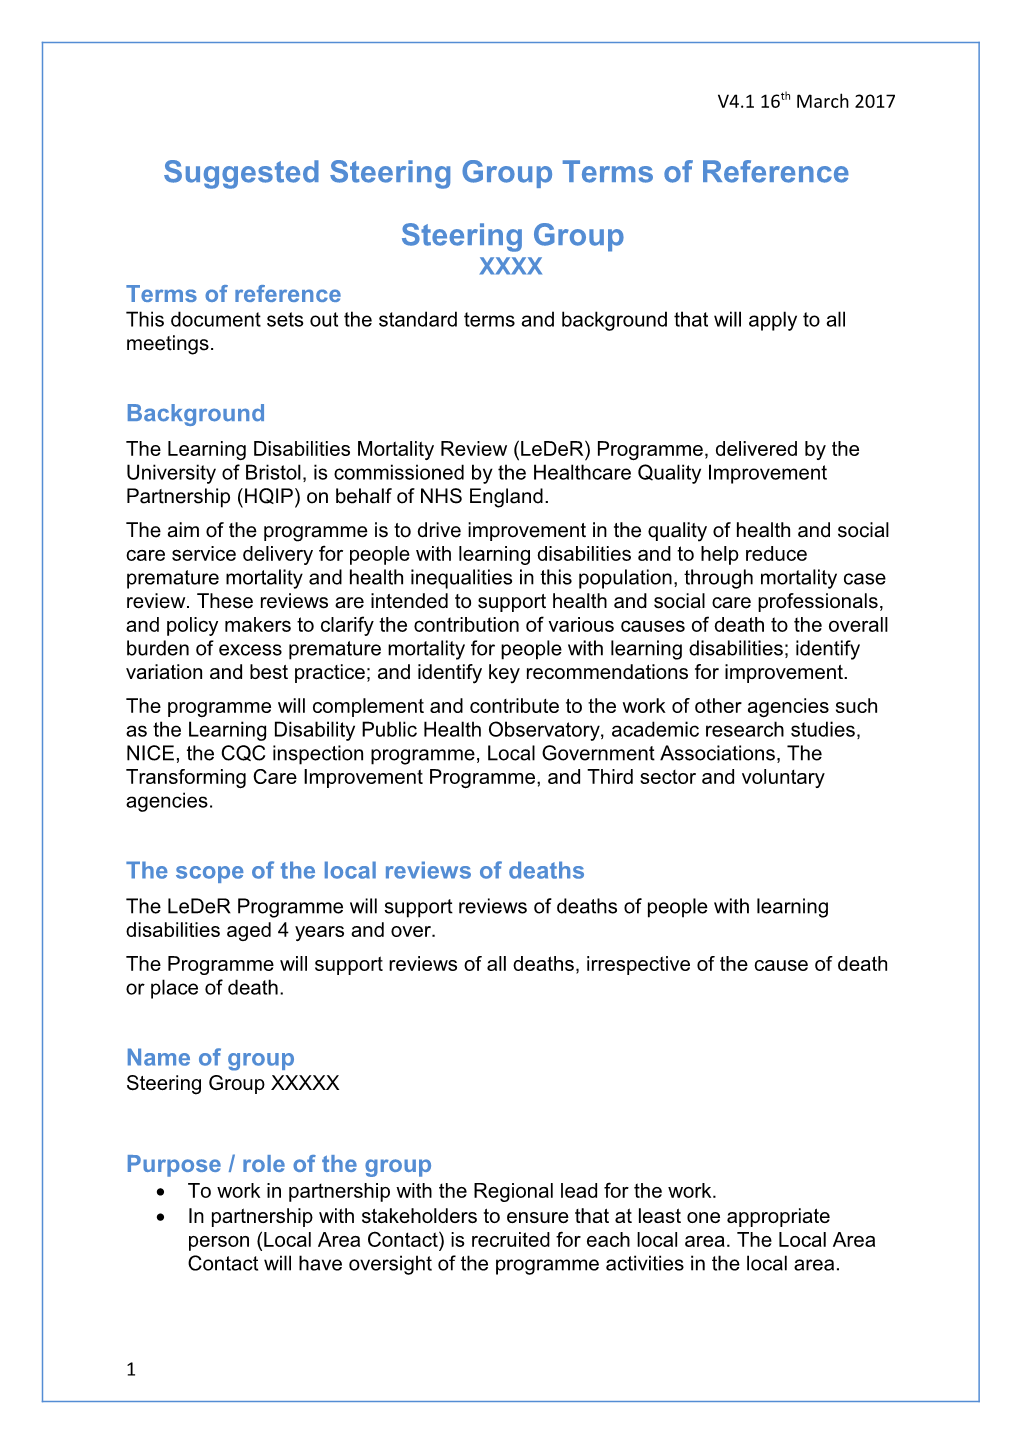 Suggested Steering Group Terms of Reference